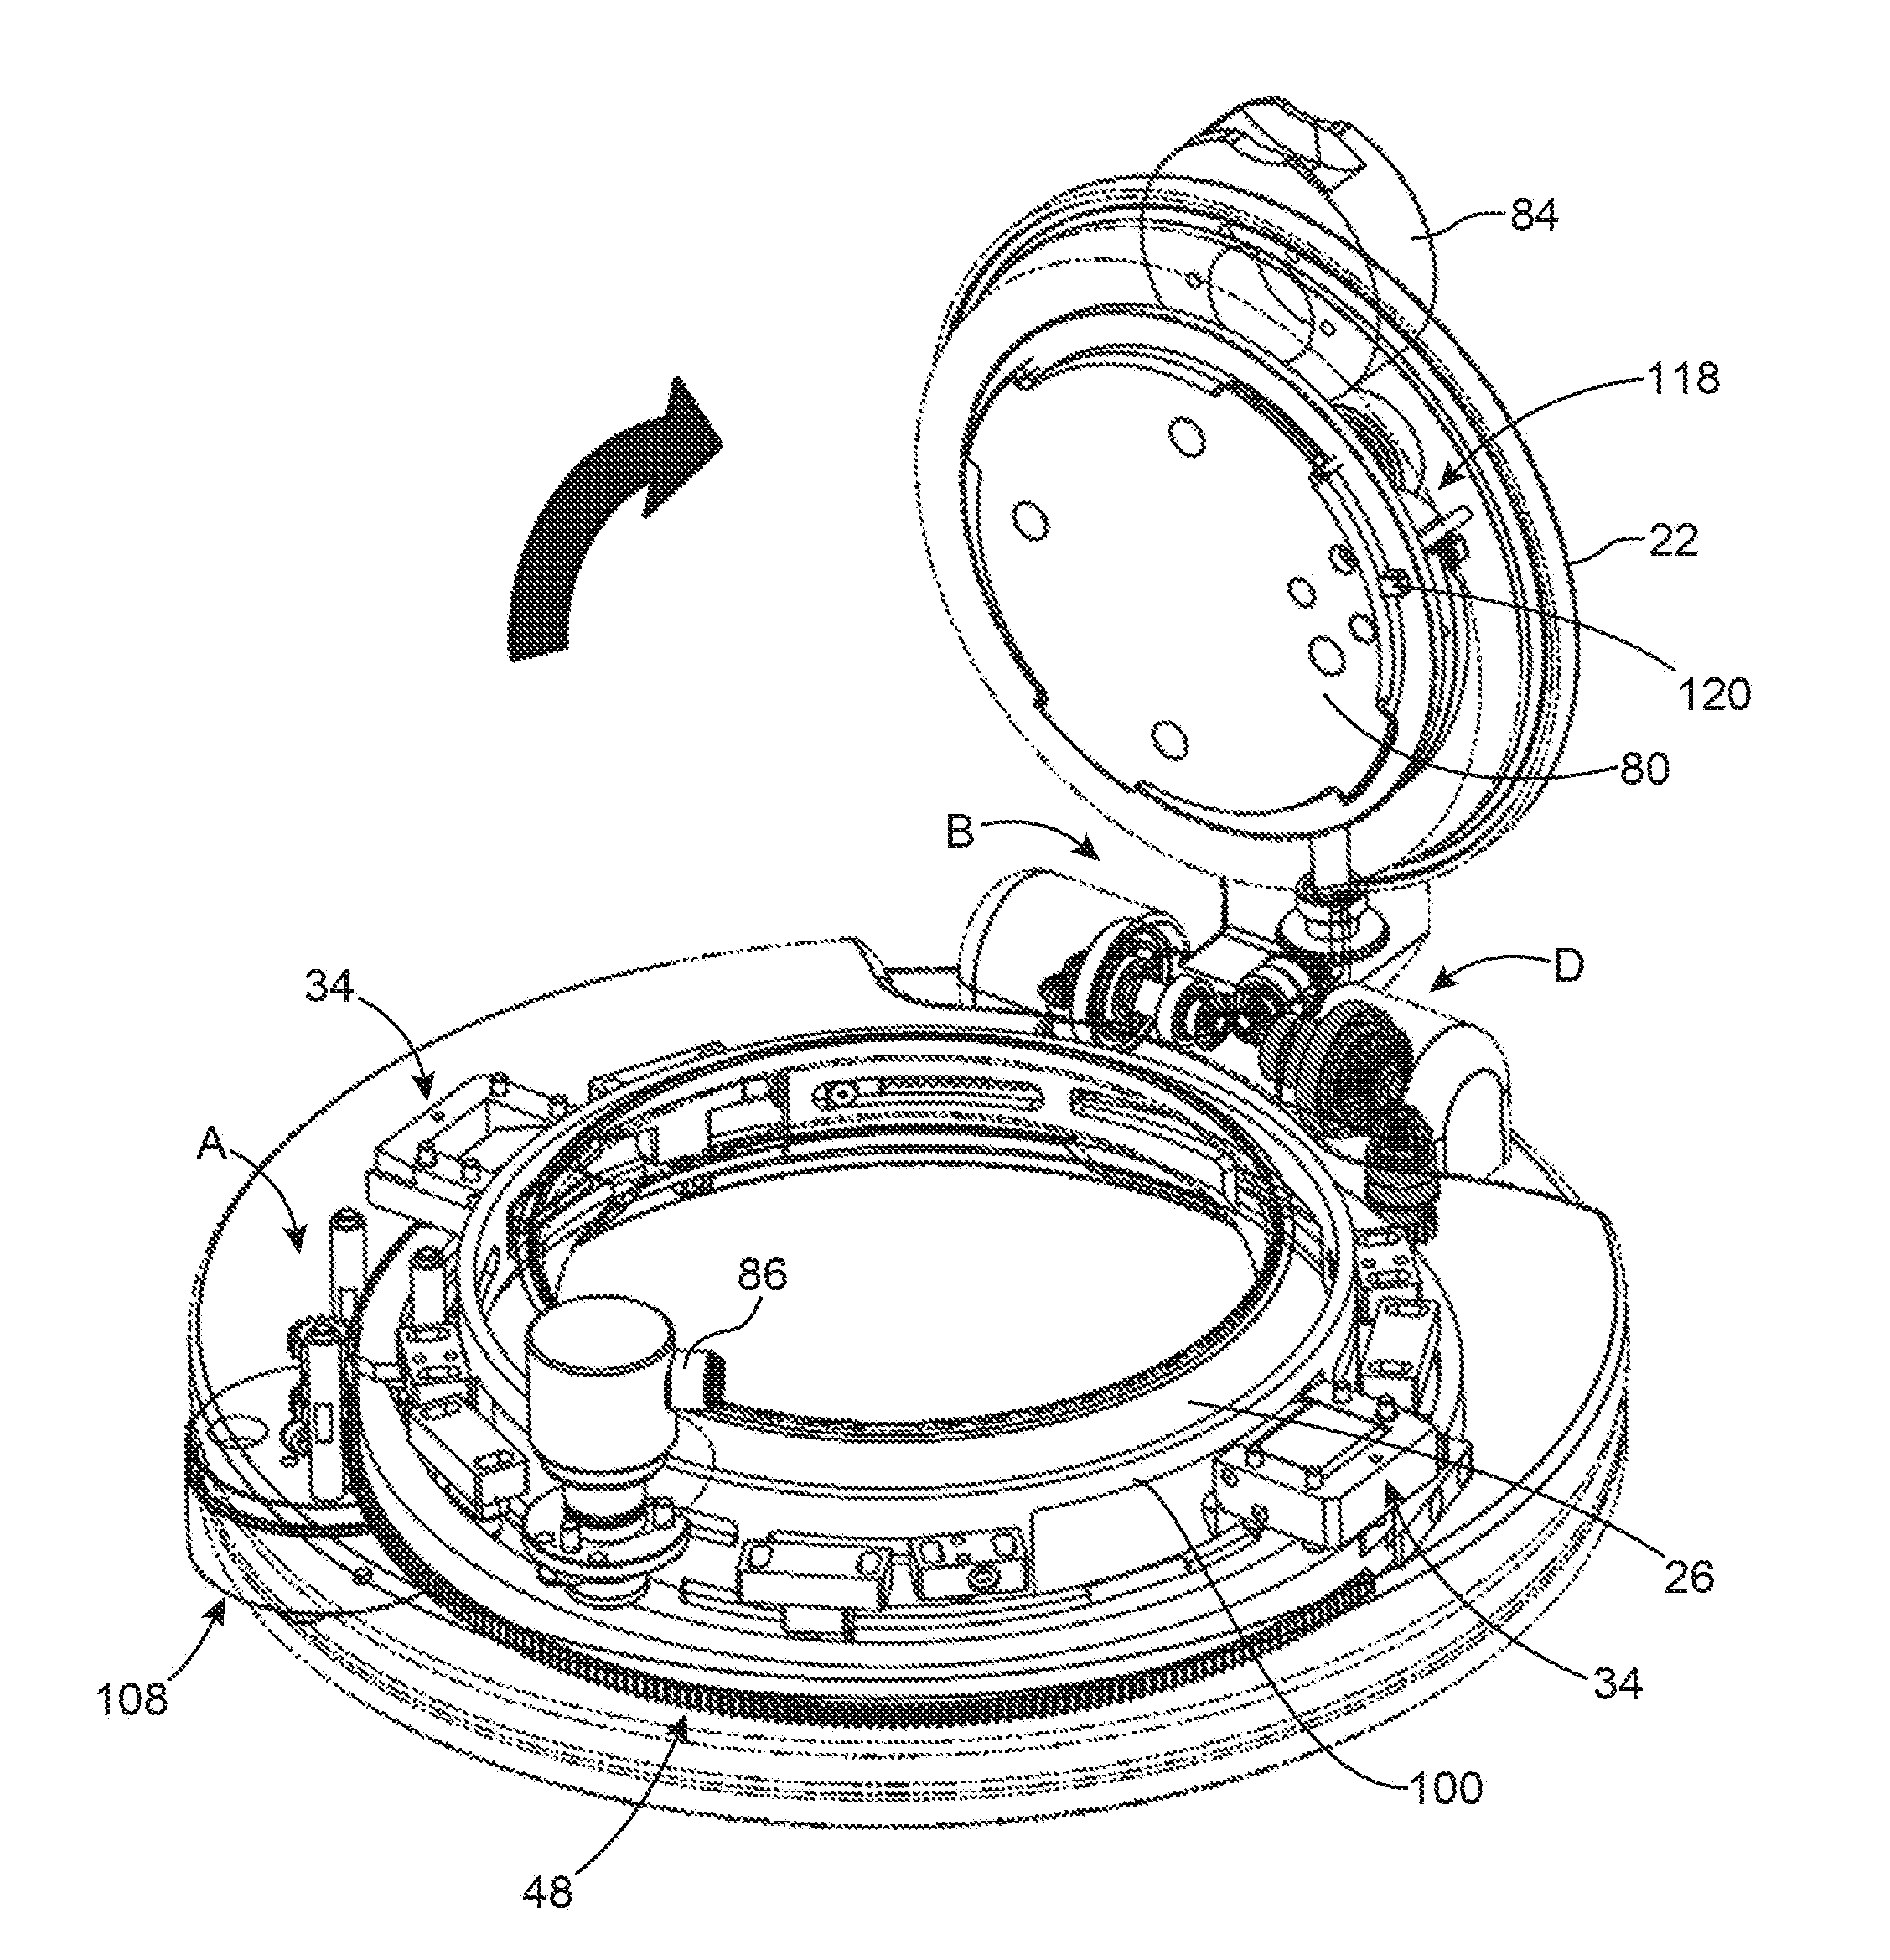 Device providing fluidtight connection in two enclosed volumes comprising means of holding prior to connection